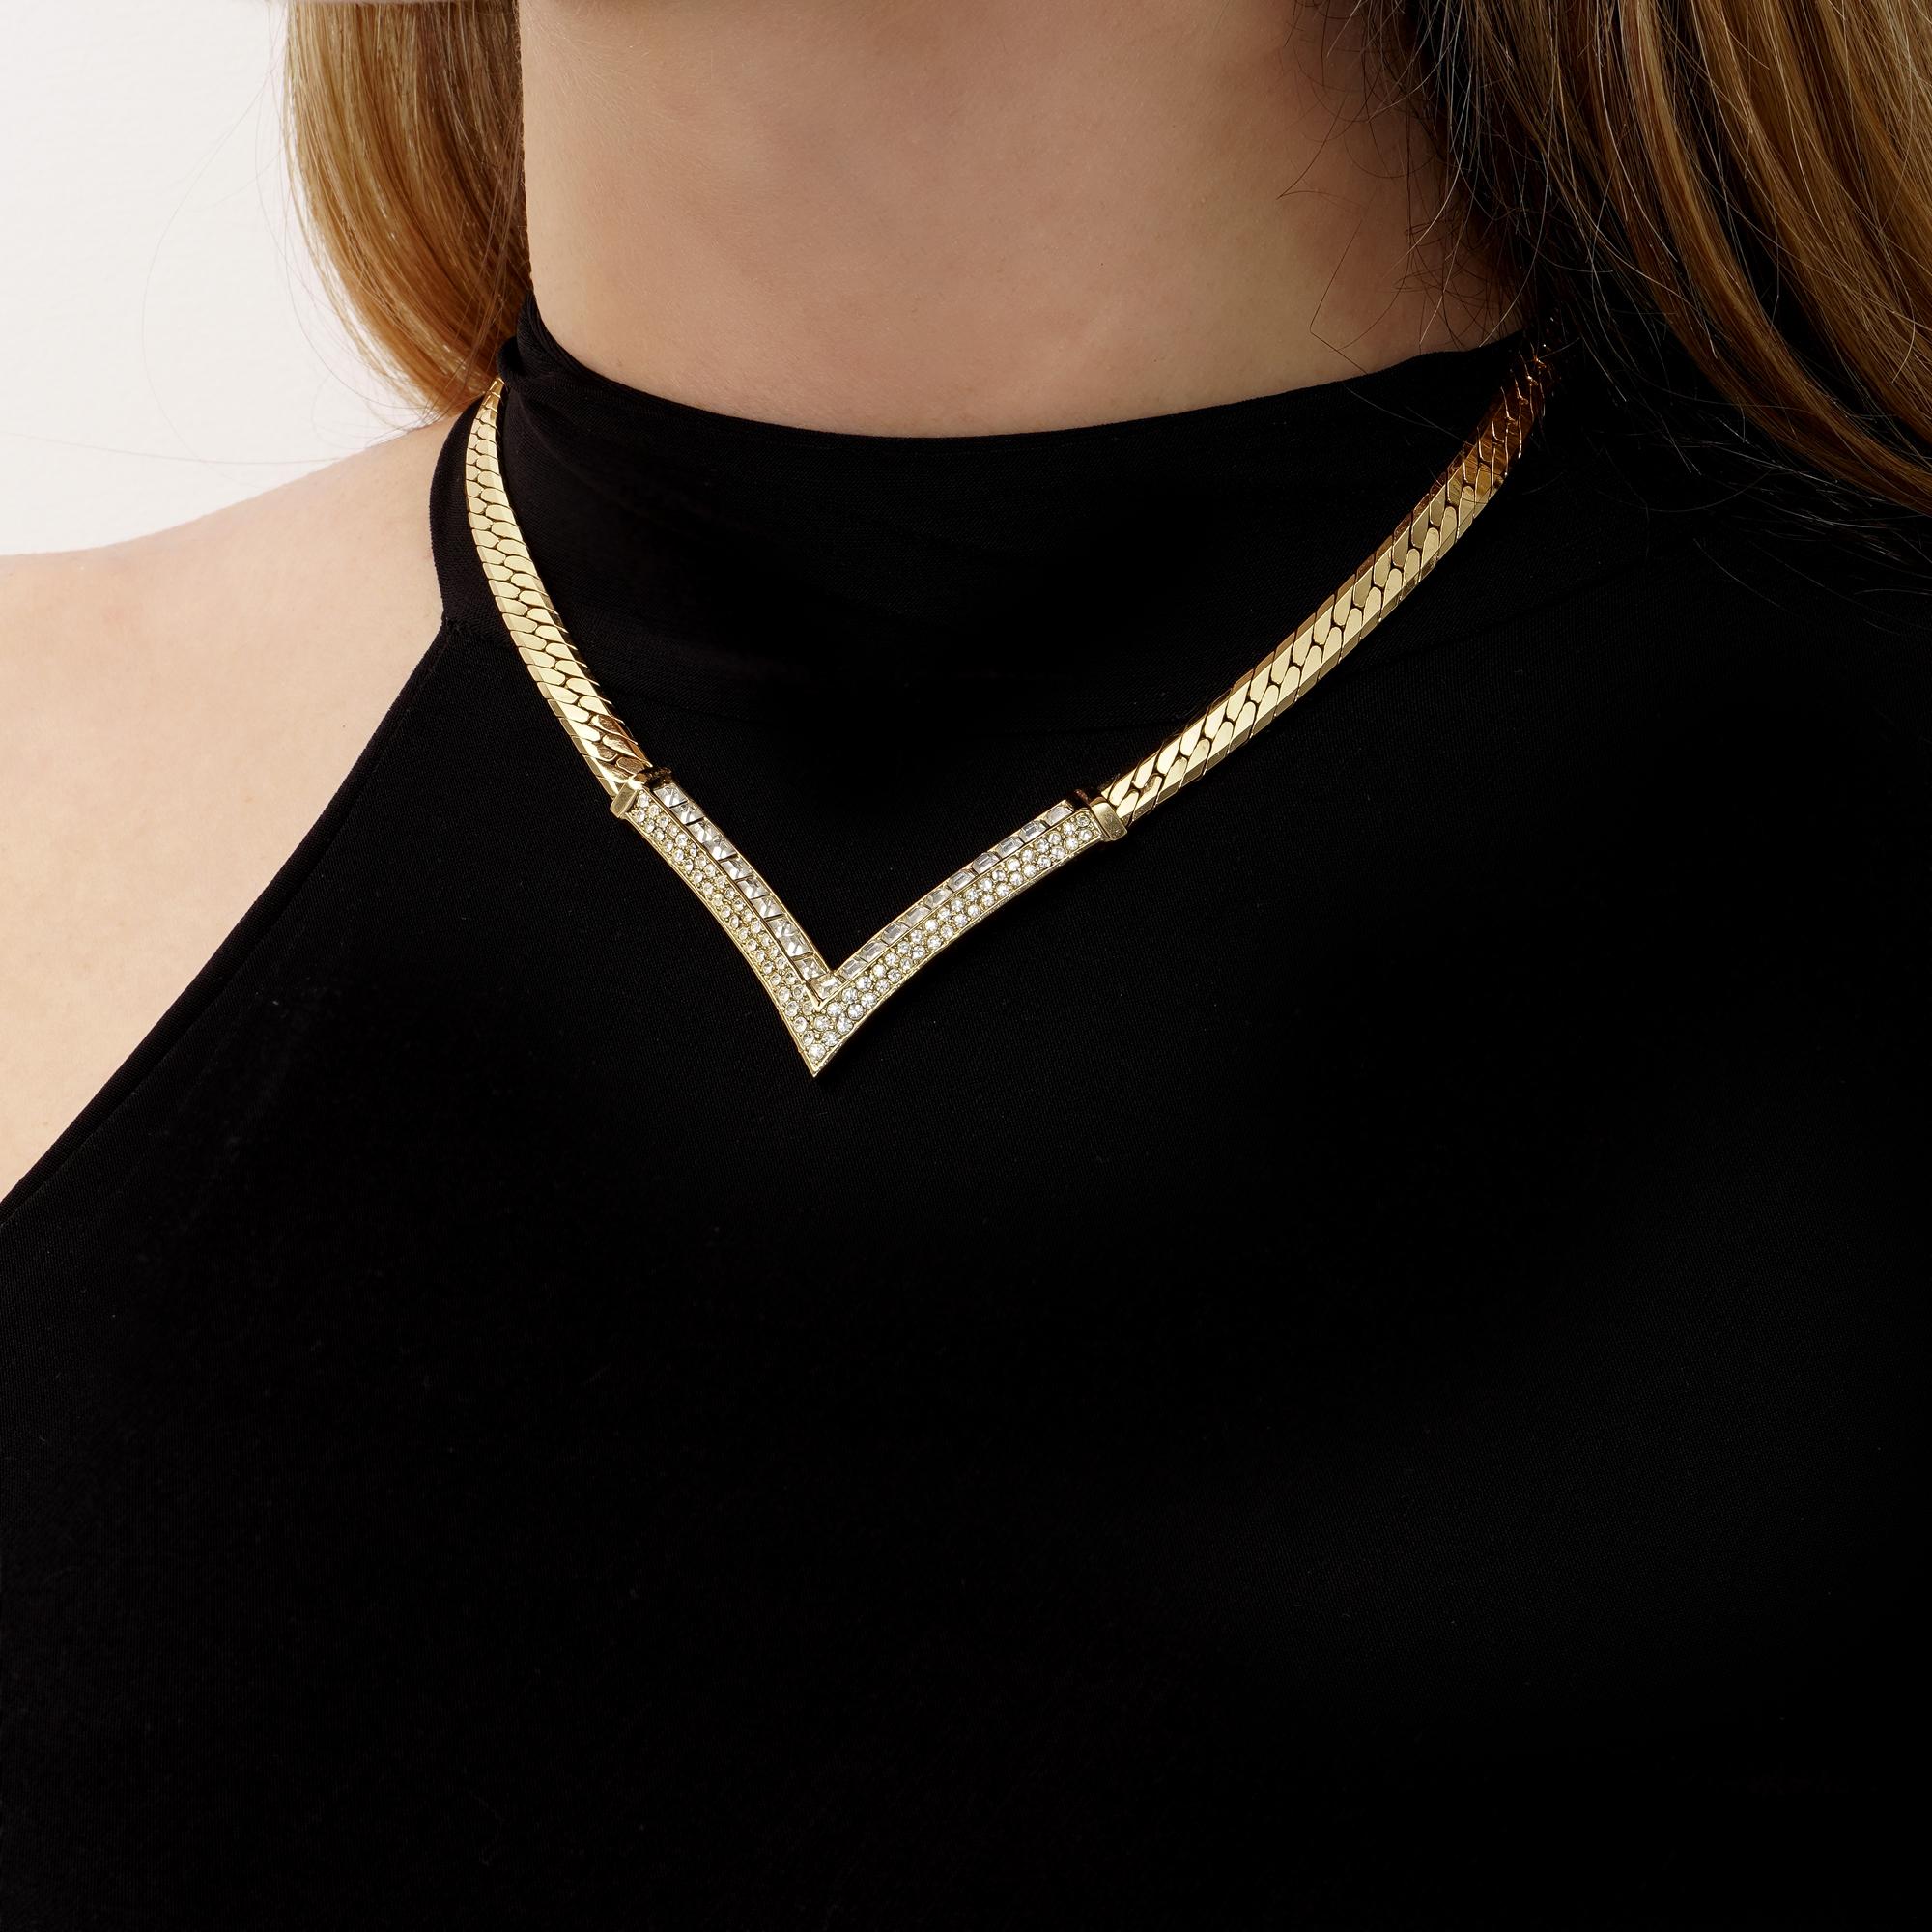 Indulge in the timeless elegance of this Vintage Christian Dior Crystal Arrow Triangle Pendant Collar Necklace, a stunning piece crafted circa the 1980s, exuding the sophistication and glamour synonymous with the Dior brand.

This exquisite necklace